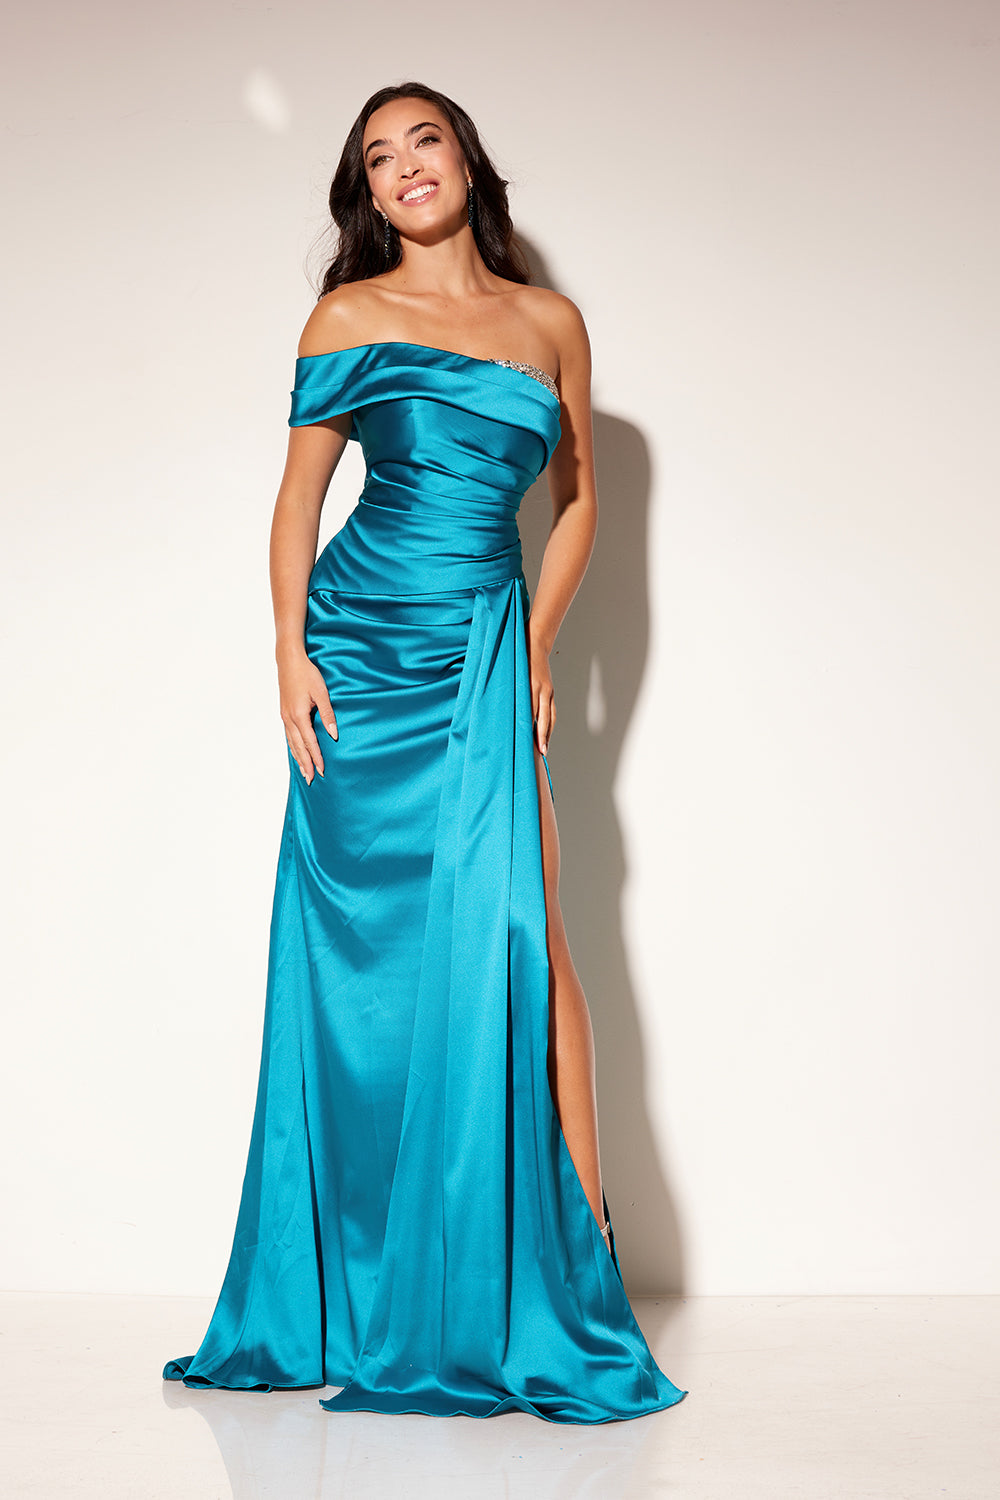  Lucci-Lu-1316-Straight-Neckline-Open-Back-High-Slit-Satin-Fit-N-Flare-Teal-Evening-Dress-B-Chic-Fashions-Prom-Dress